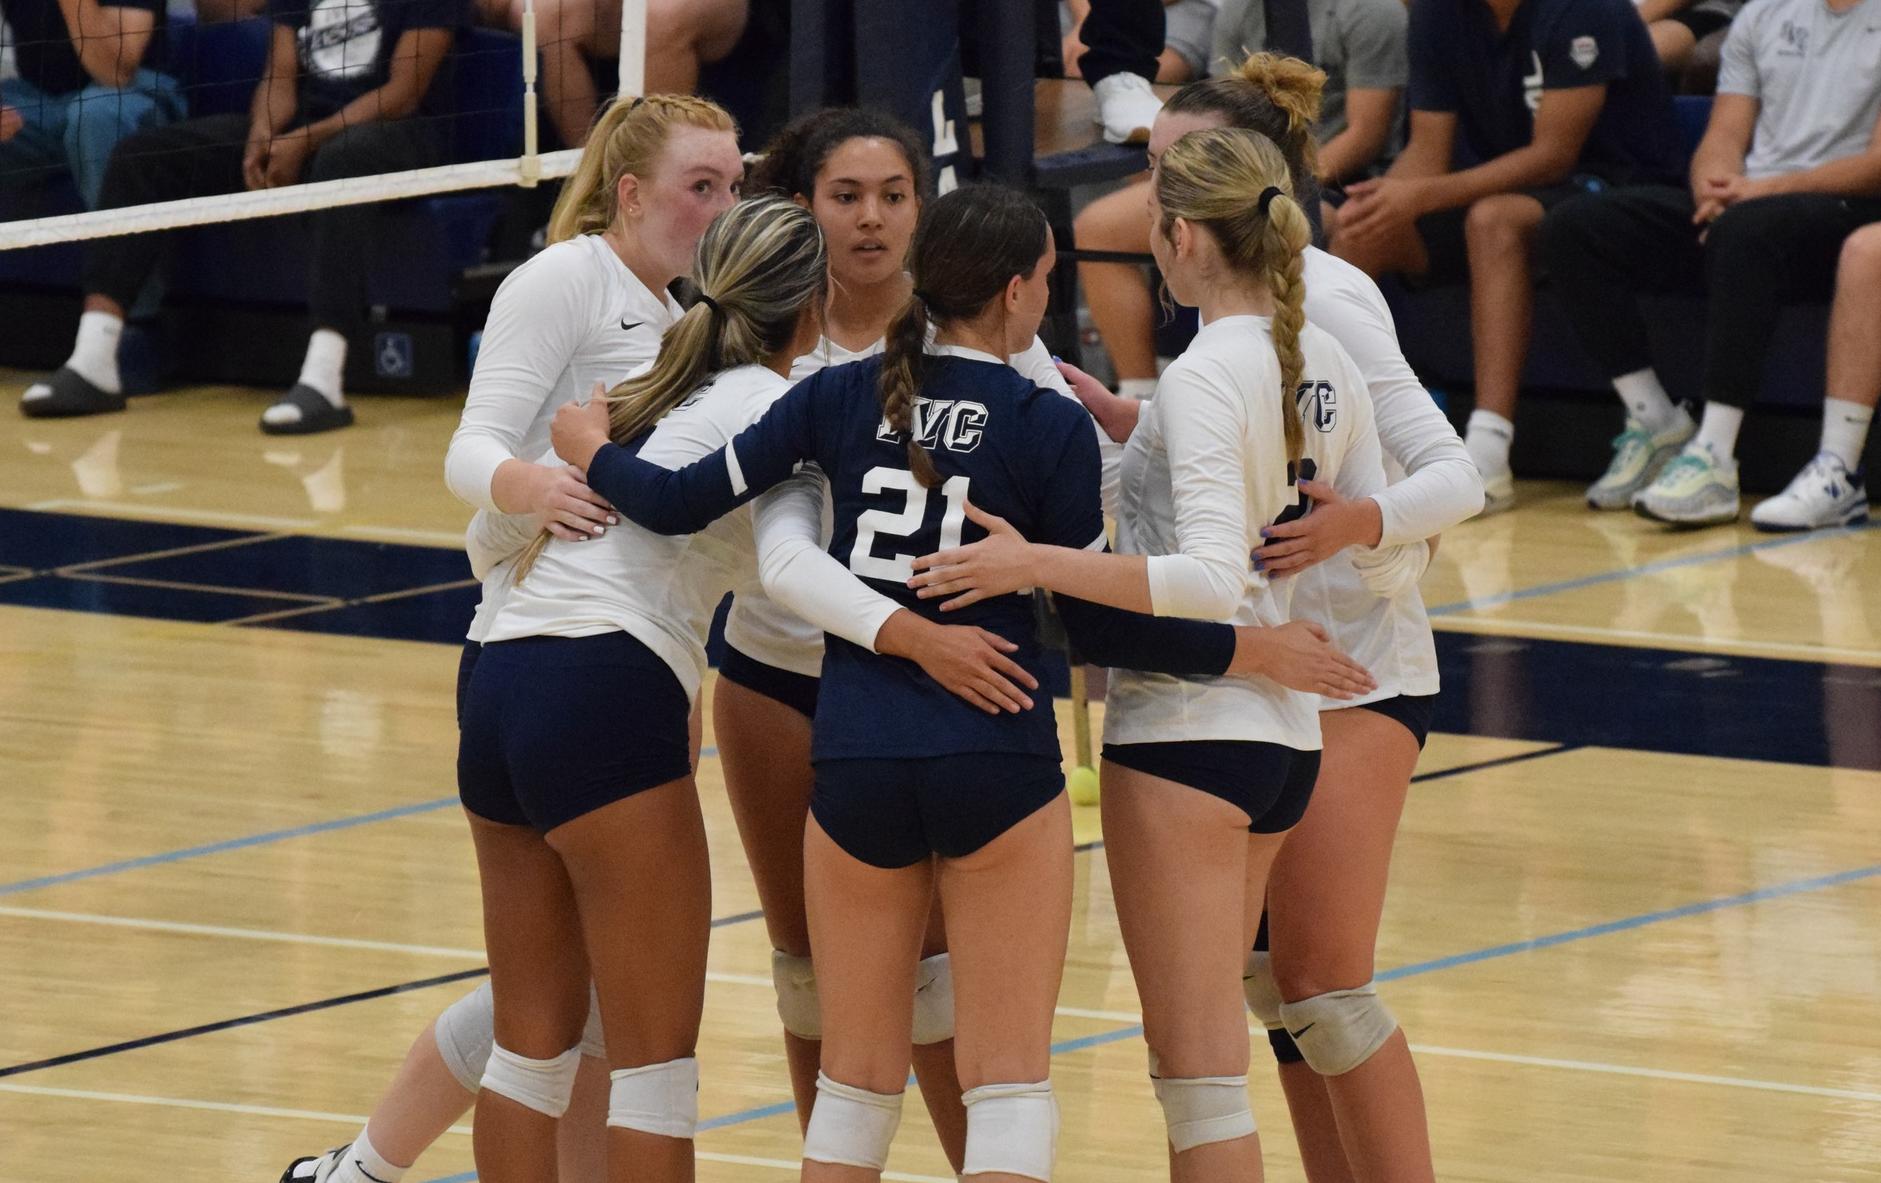 Women's volleyball team ranked No. 5 in the state in first poll